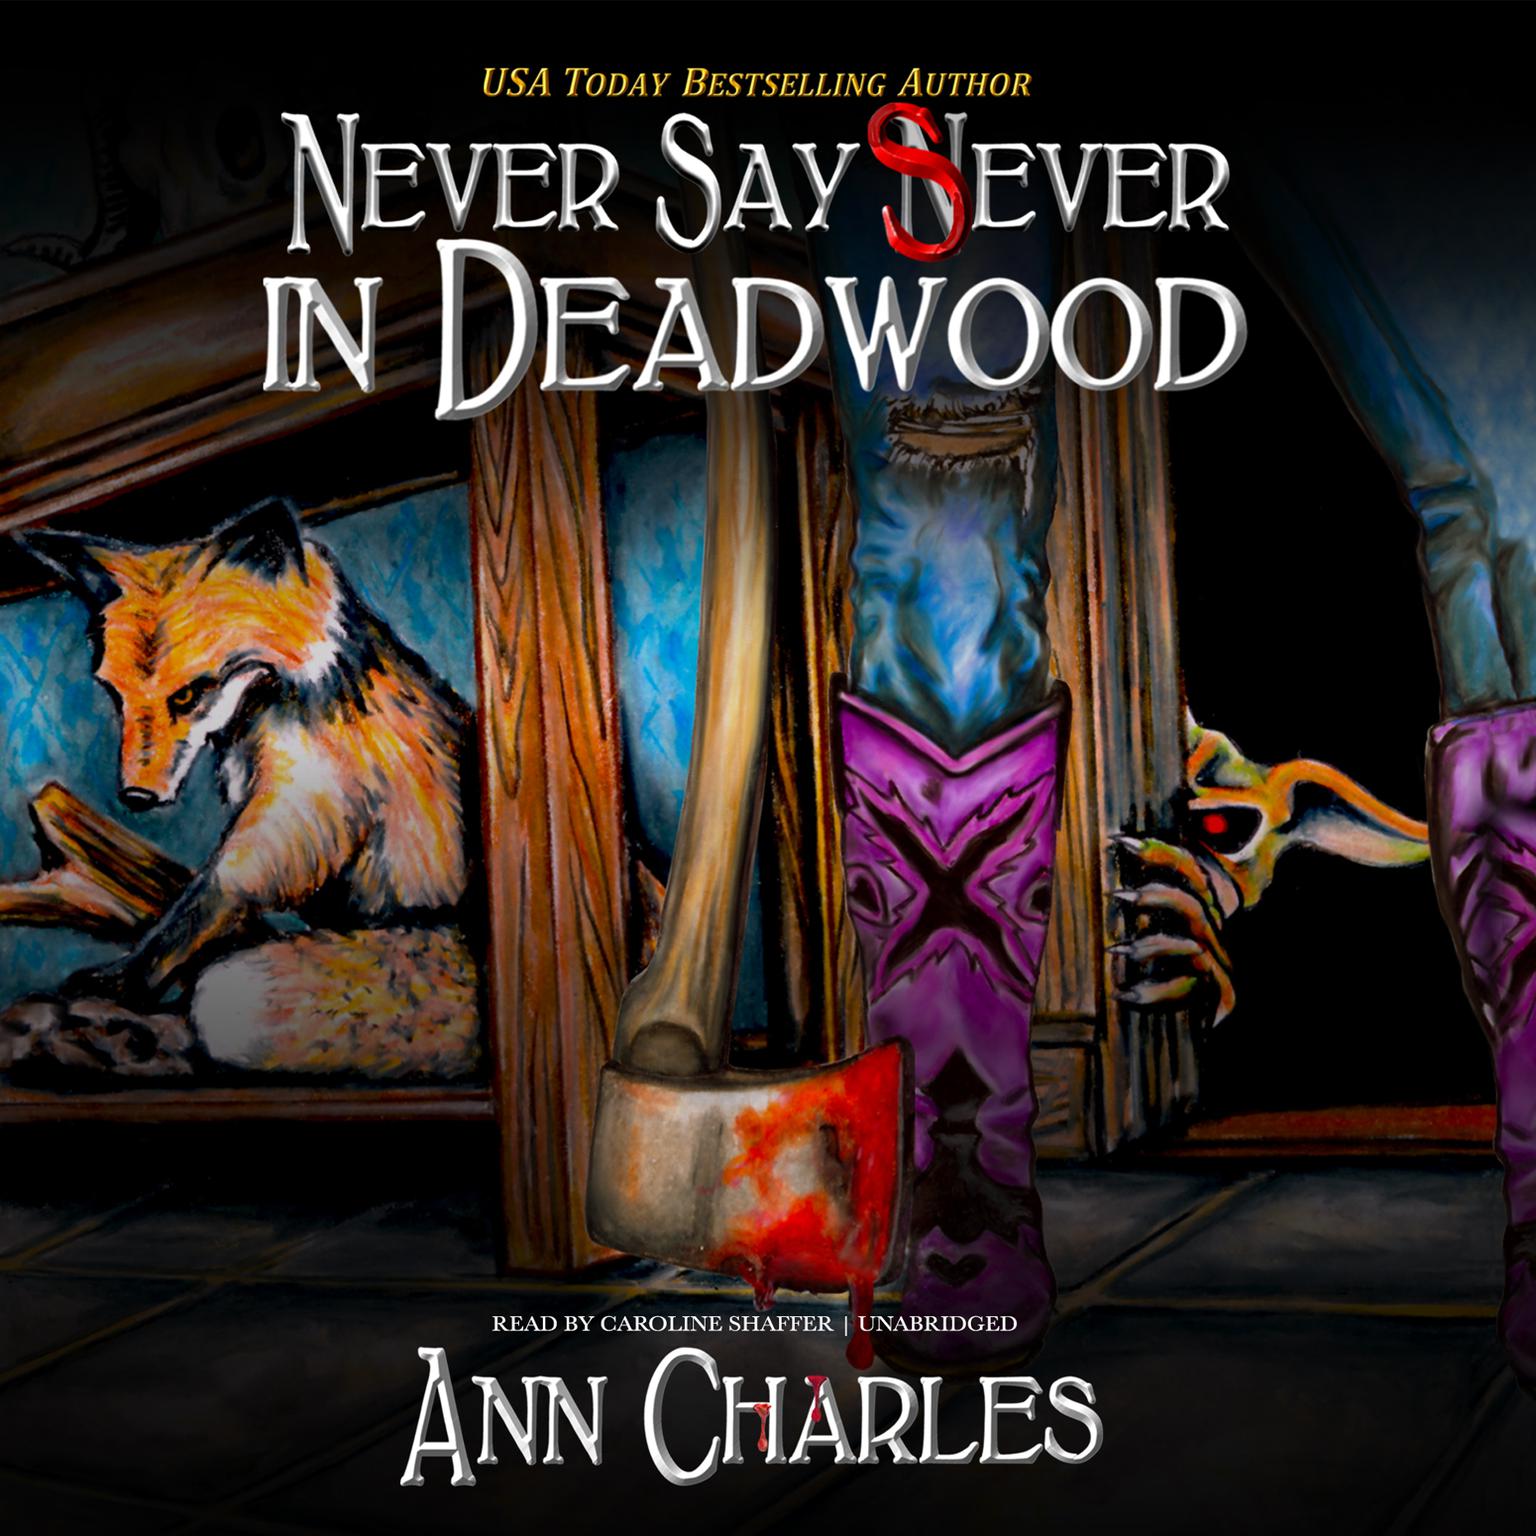 Never Say Sever in Deadwood Audiobook, by Ann Charles